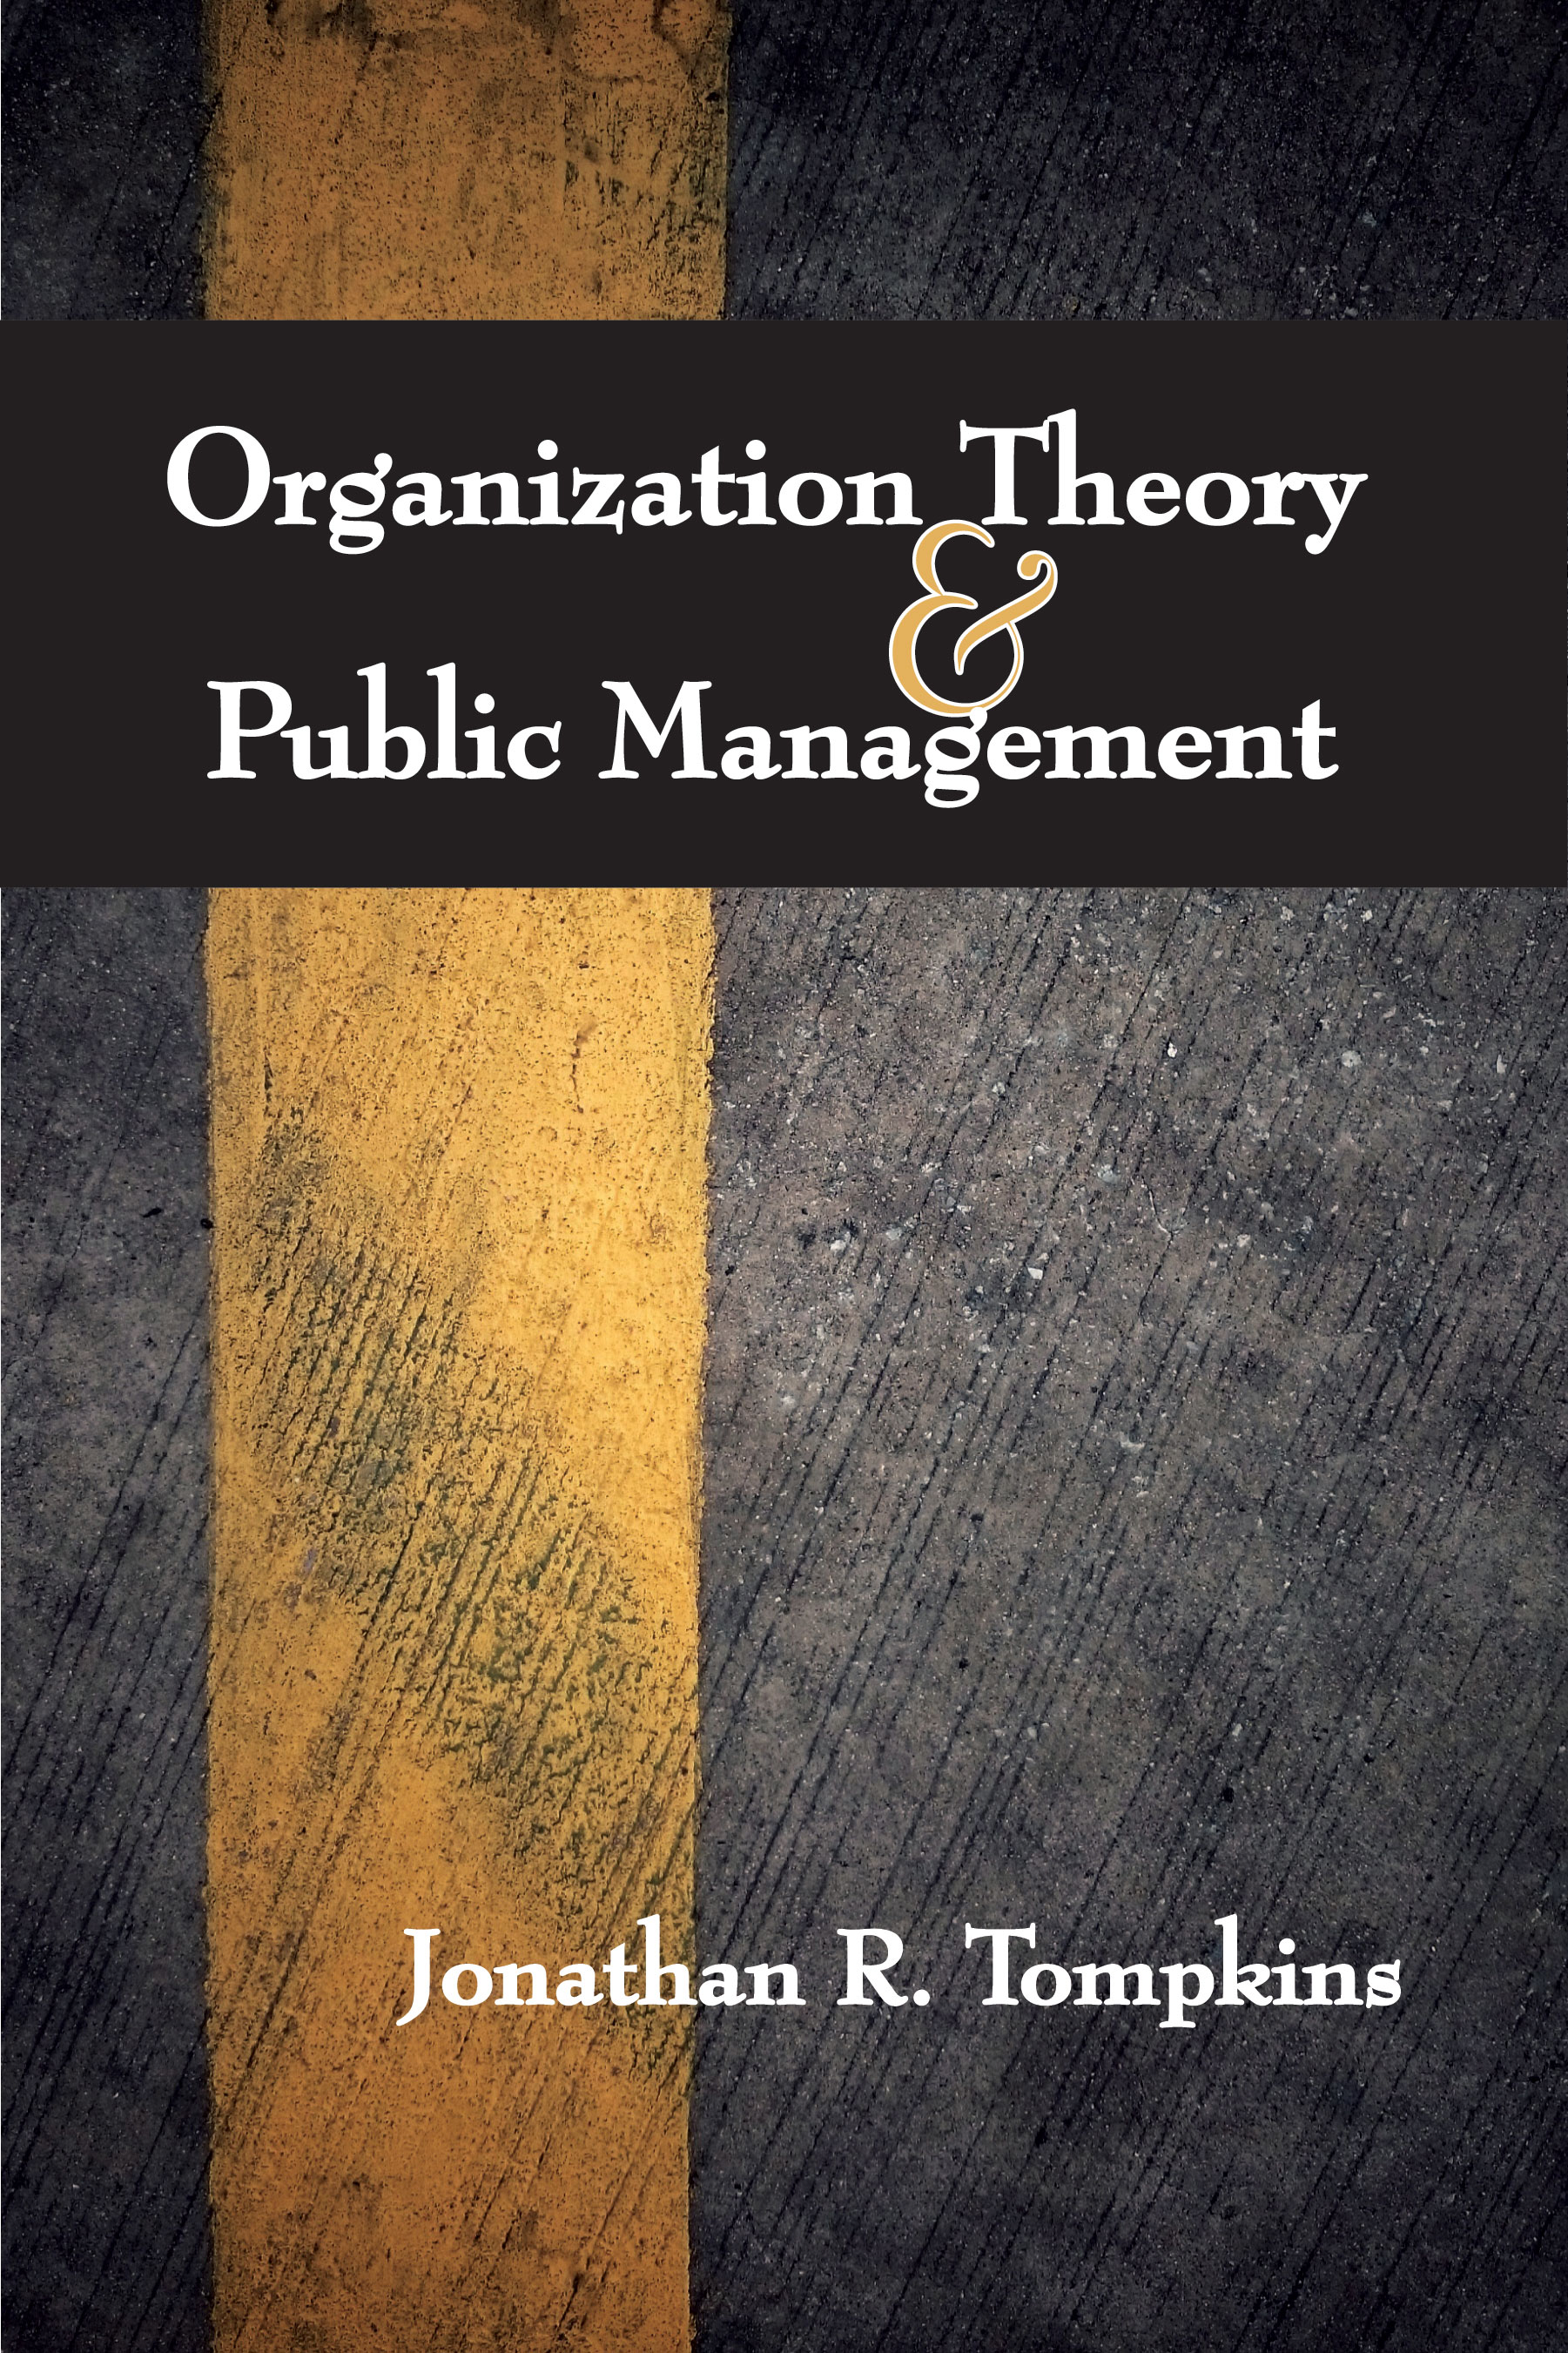 Organization Theory and Public Management:  by Jonathan R. Tompkins